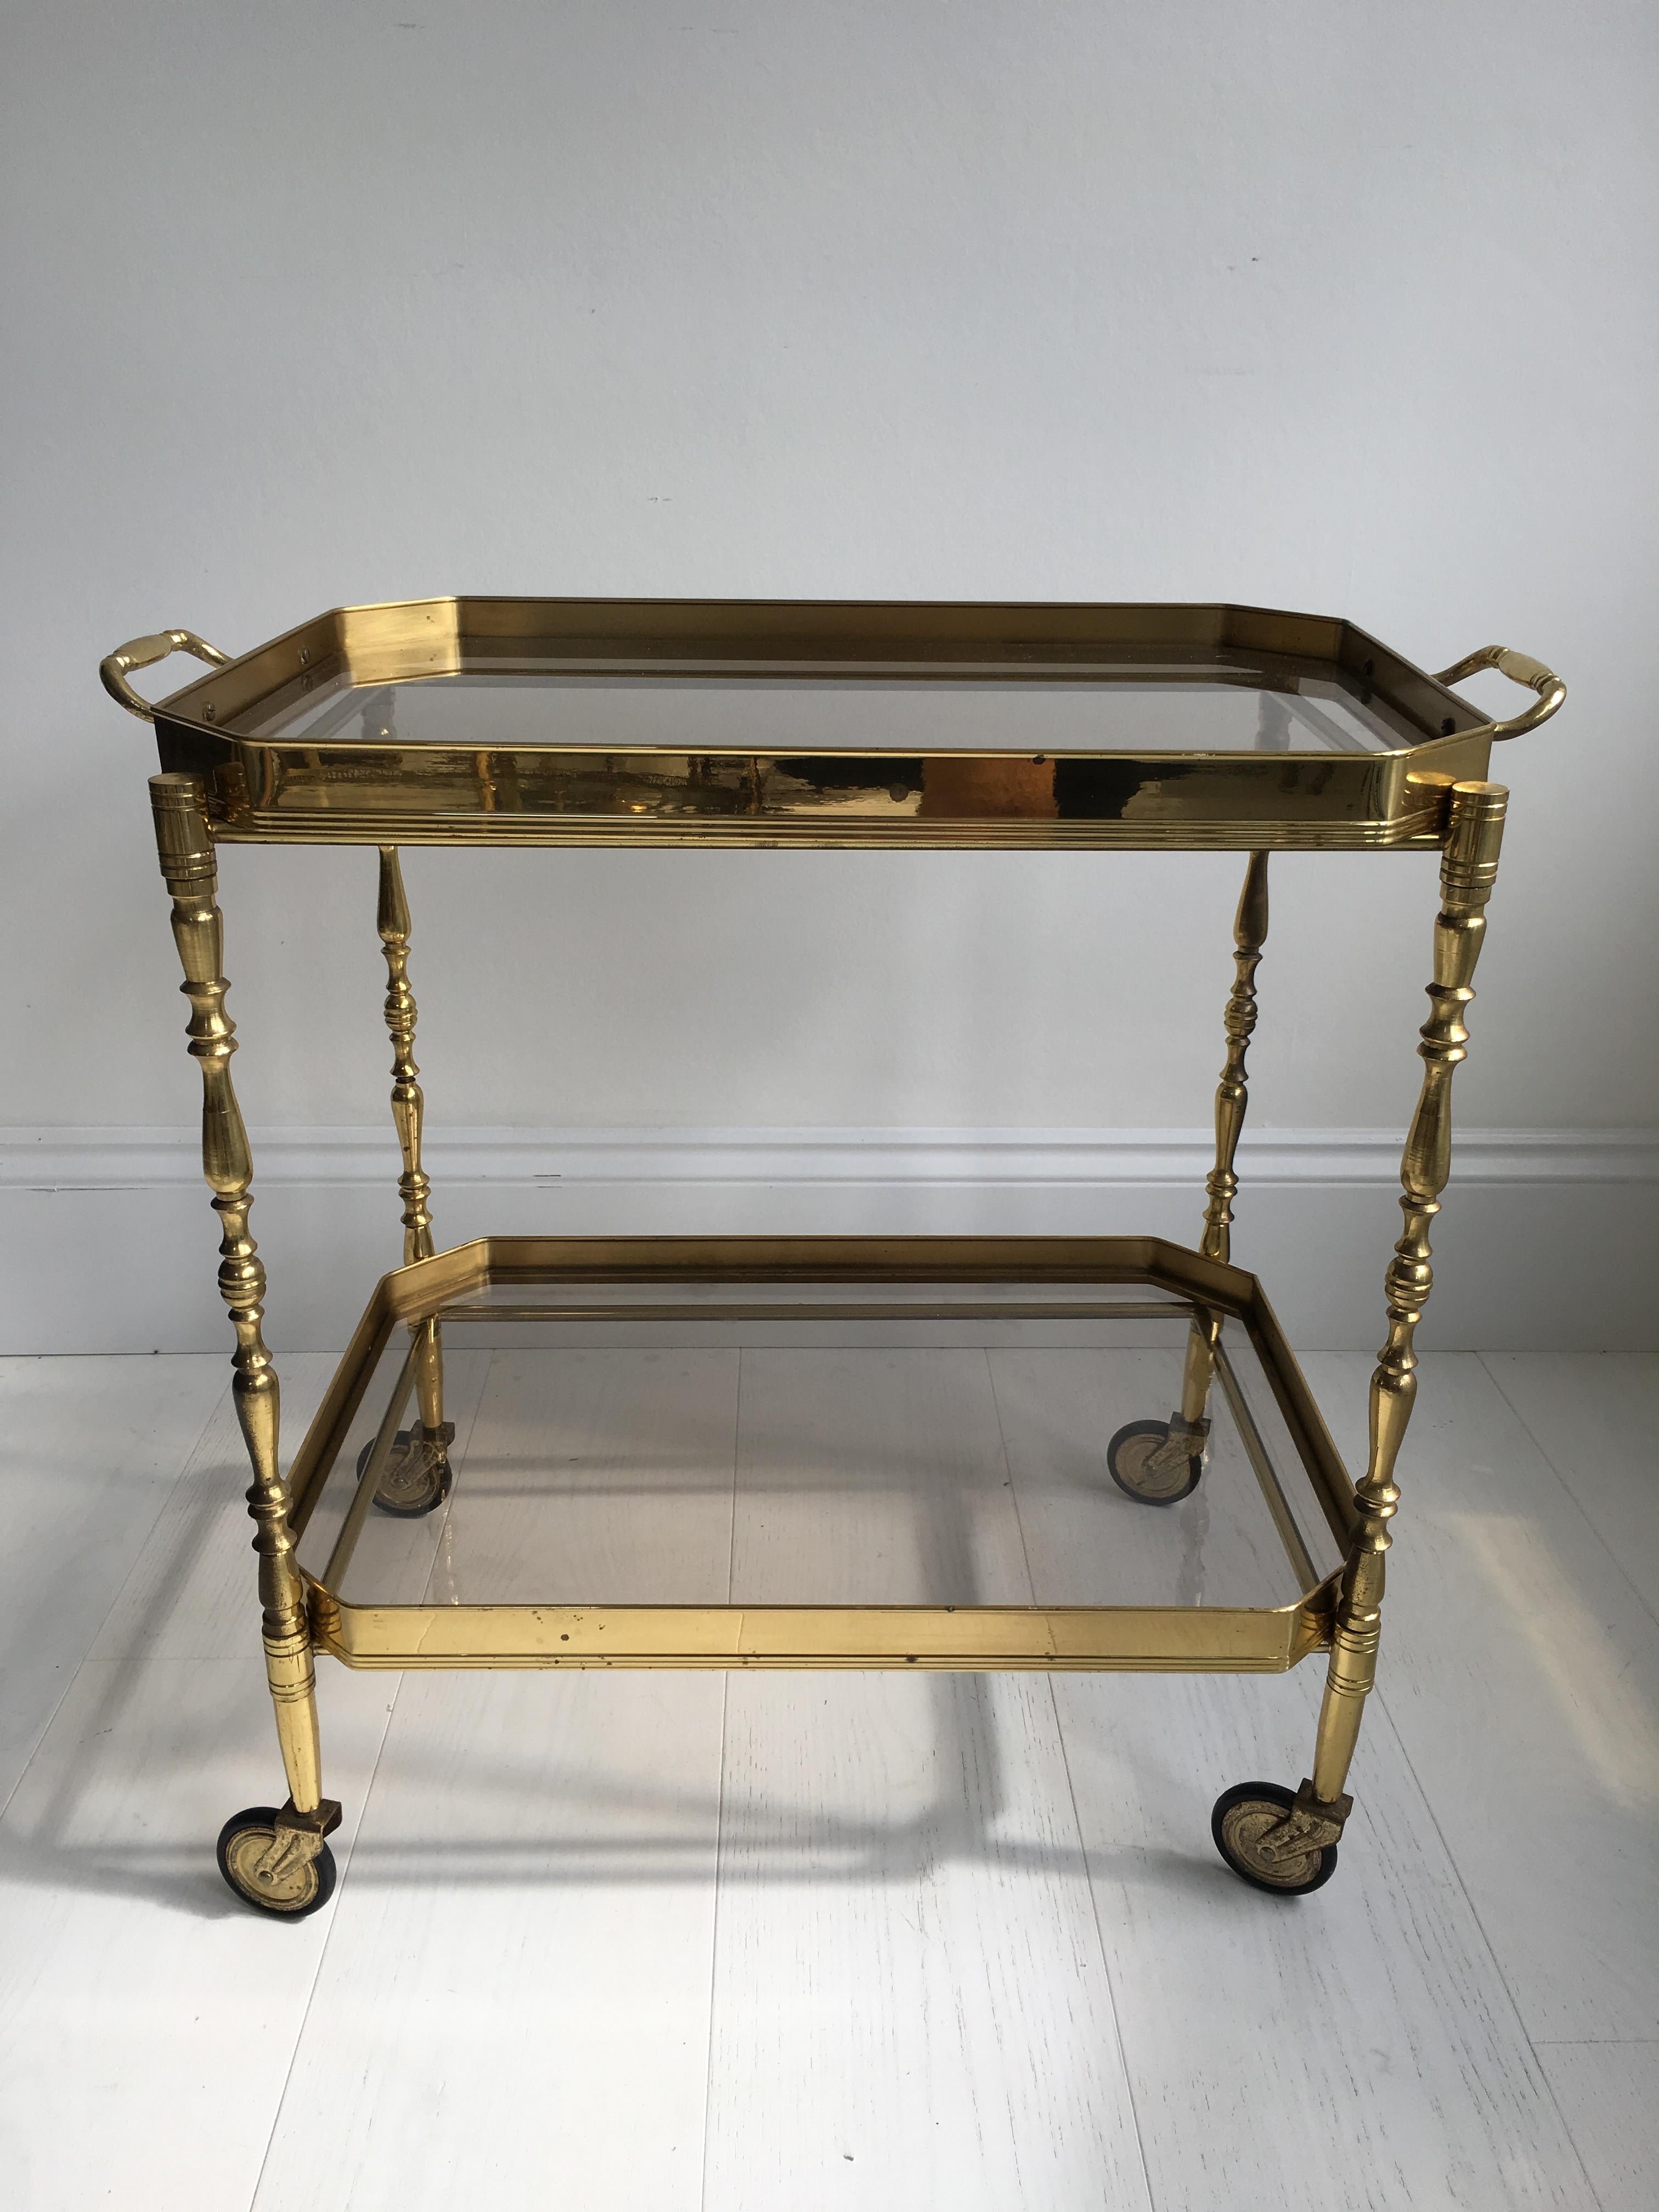 Vintage drinks trolley from France, circa 1950.

Lacquered brass frame with lift off top tray 

Perfect for smaller spaces

Measures: Overall dimensions 62cm wide (incl handles), 36cm deep and 56cm tall (54cm to glass).